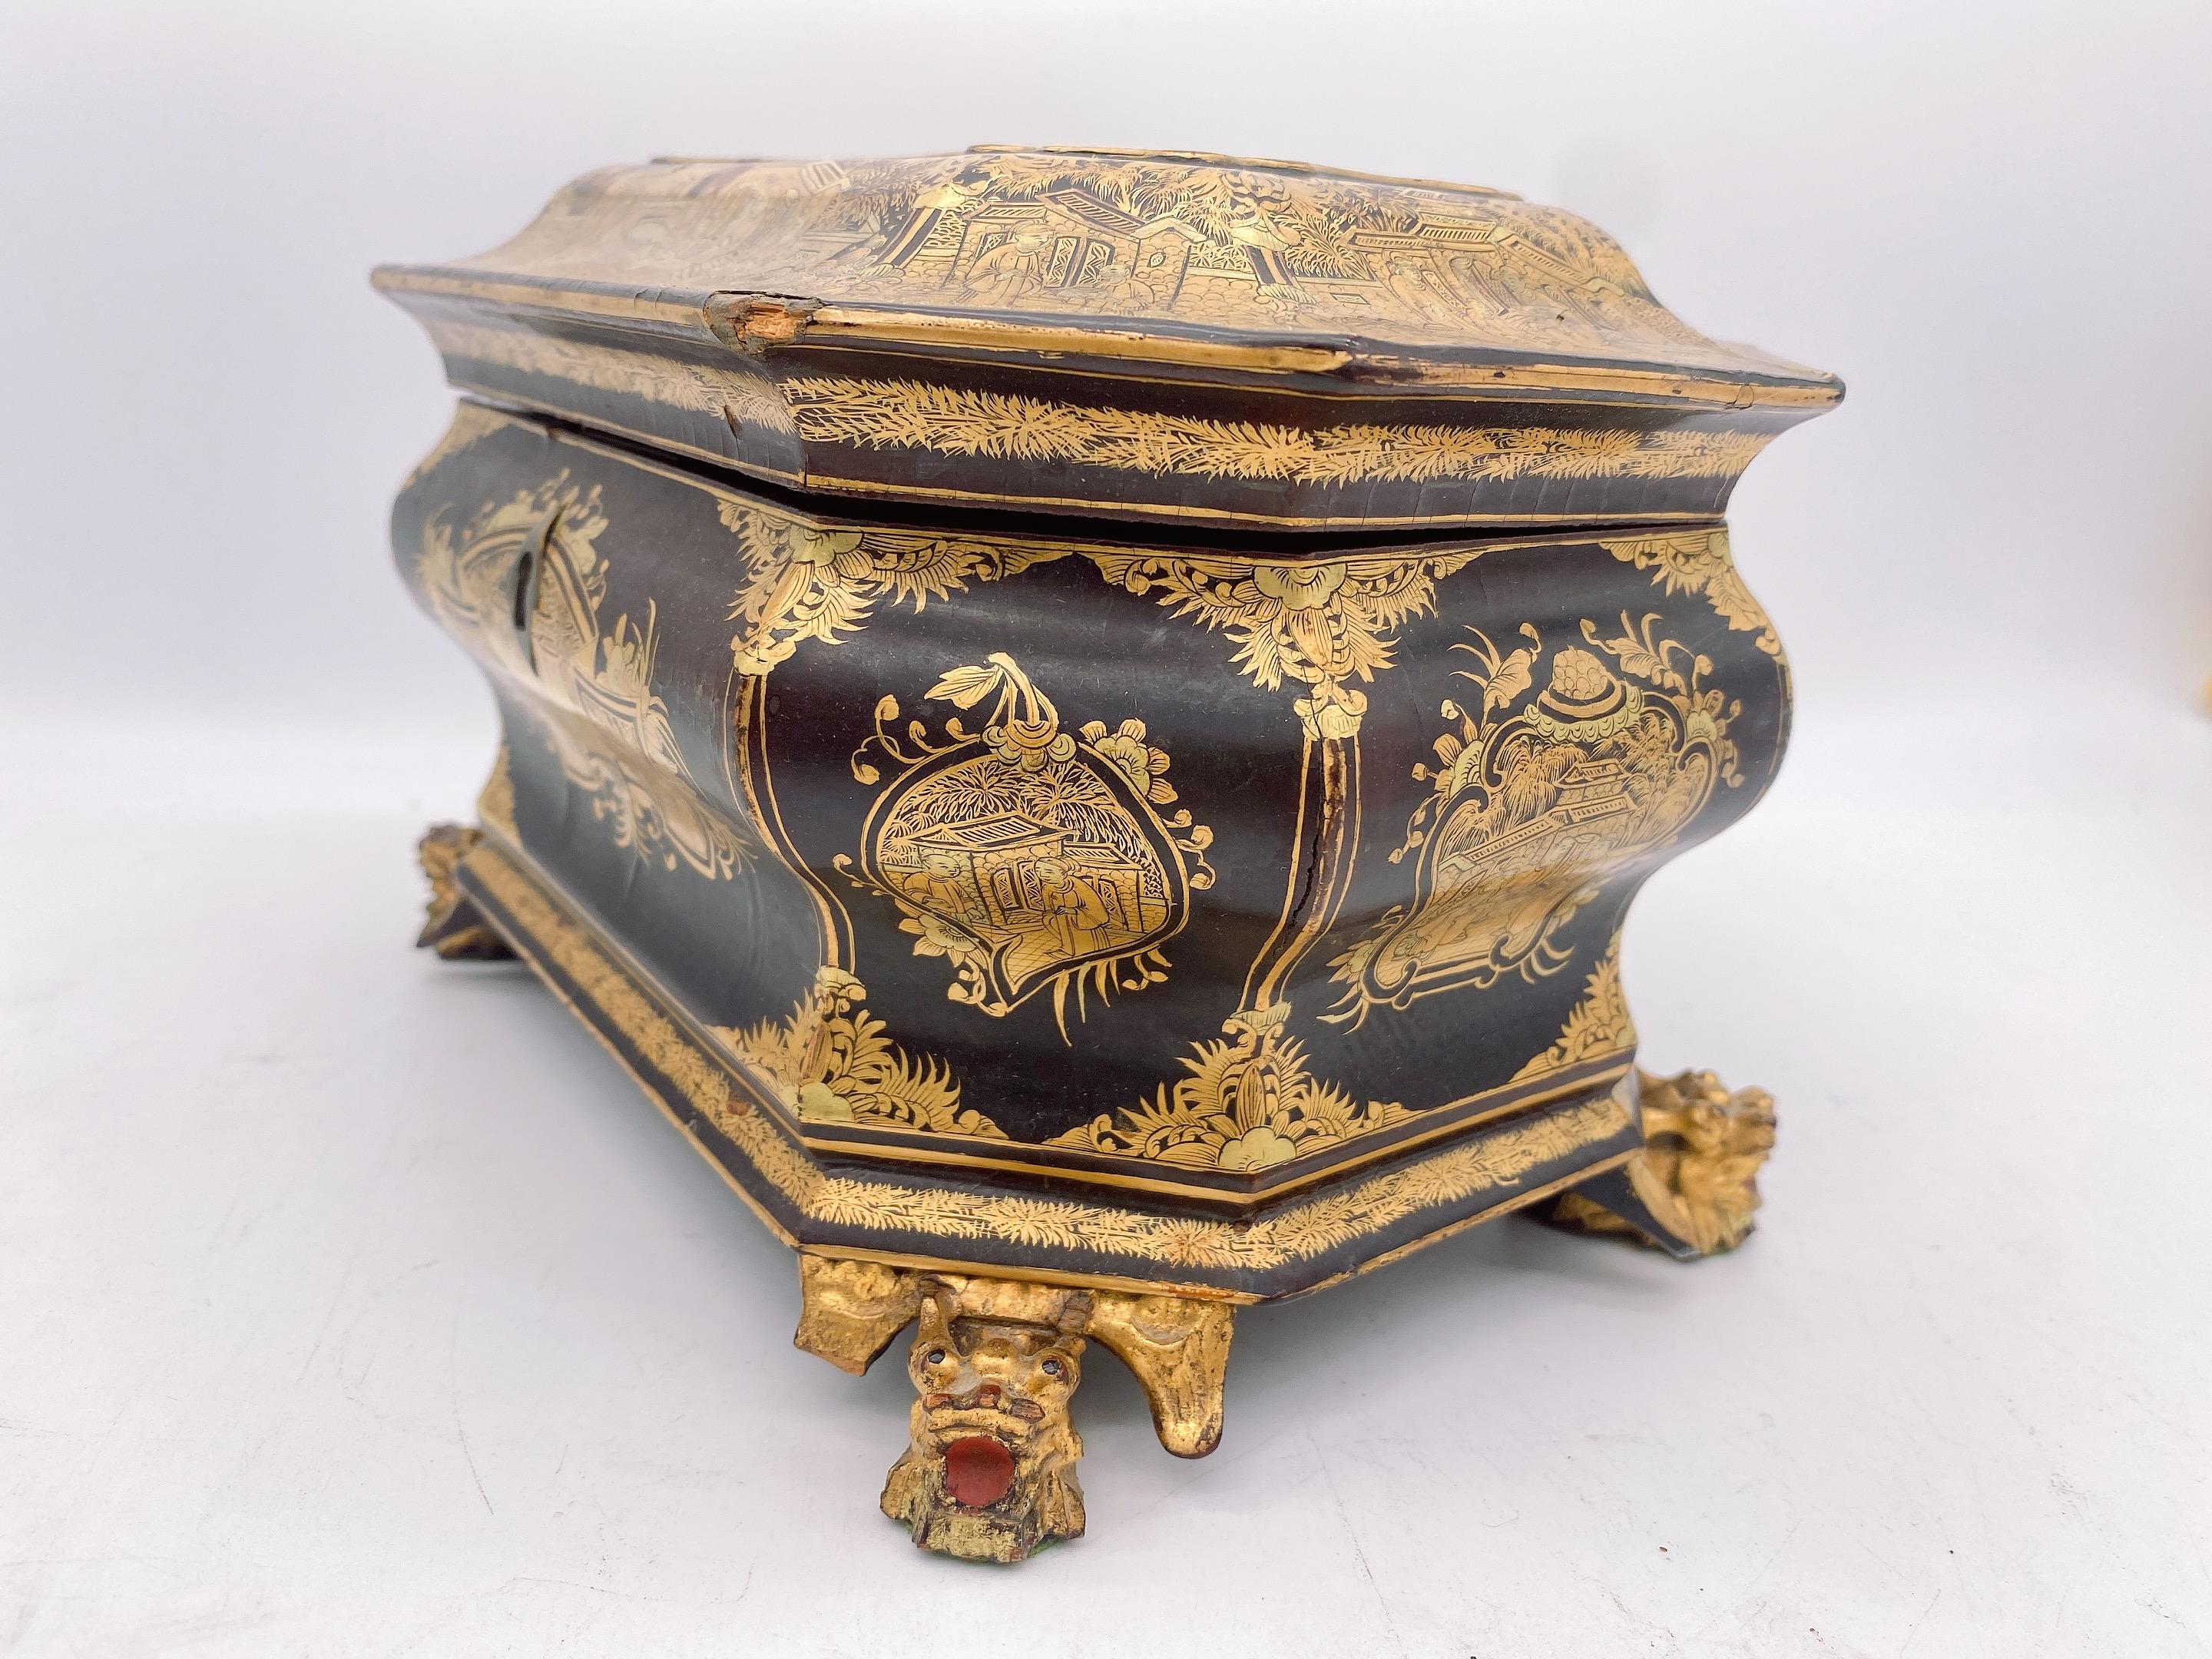 Hand-Carved 19th Century Antique Gilt Lacquer Chinese Tea Caddy